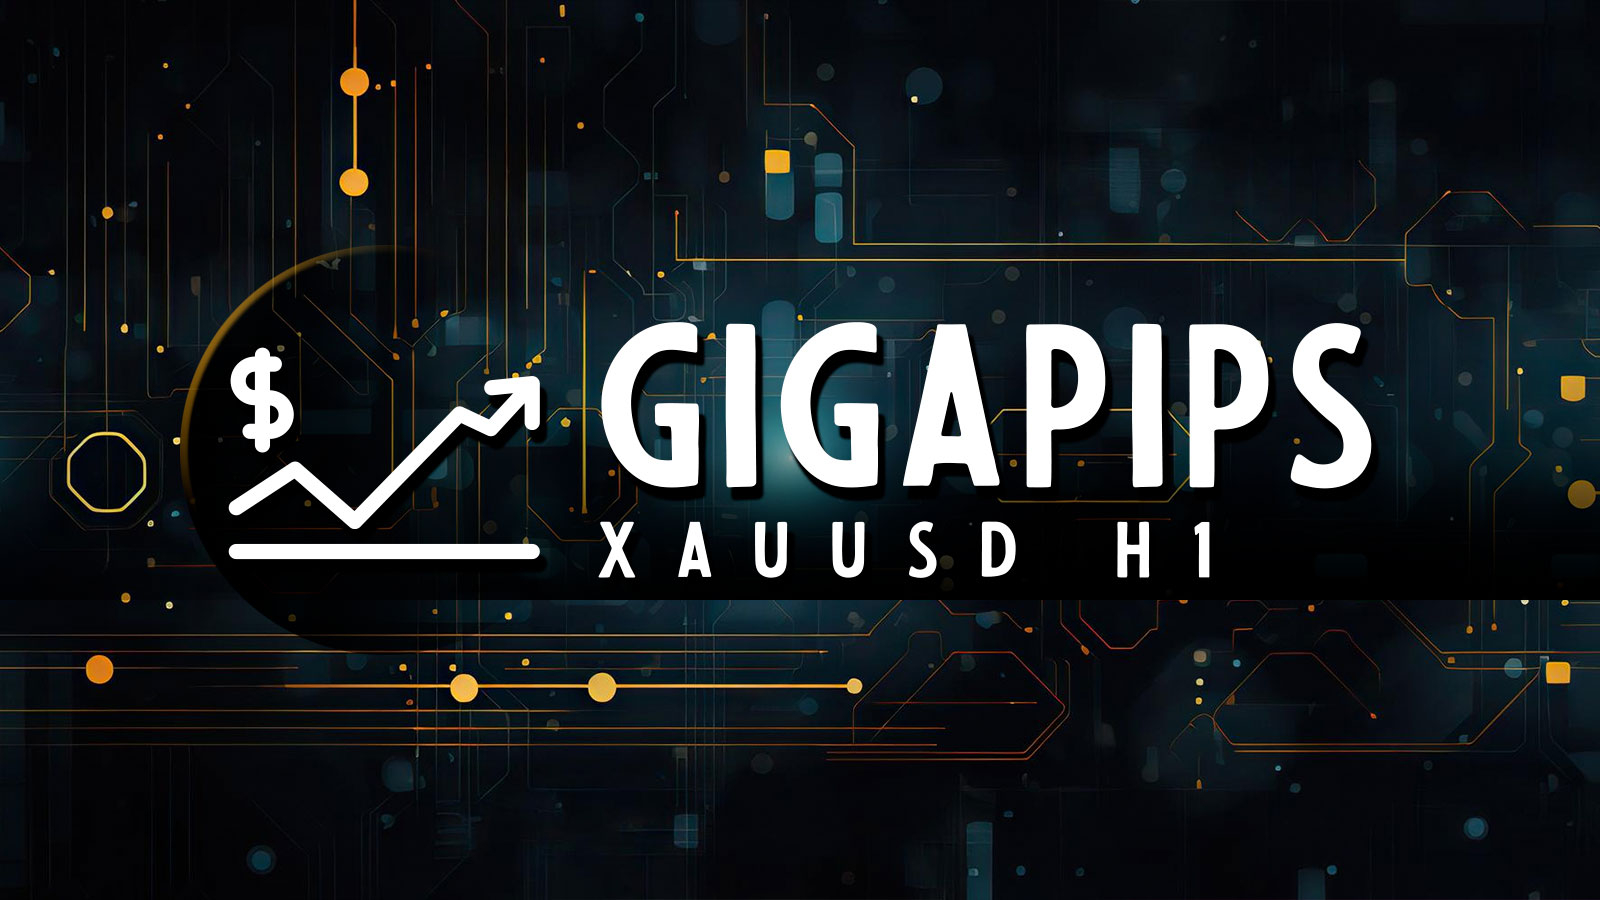 Introducing GigaPips by Avenix Fzco: The Cutting-Edge Forex Robot for Modern Traders